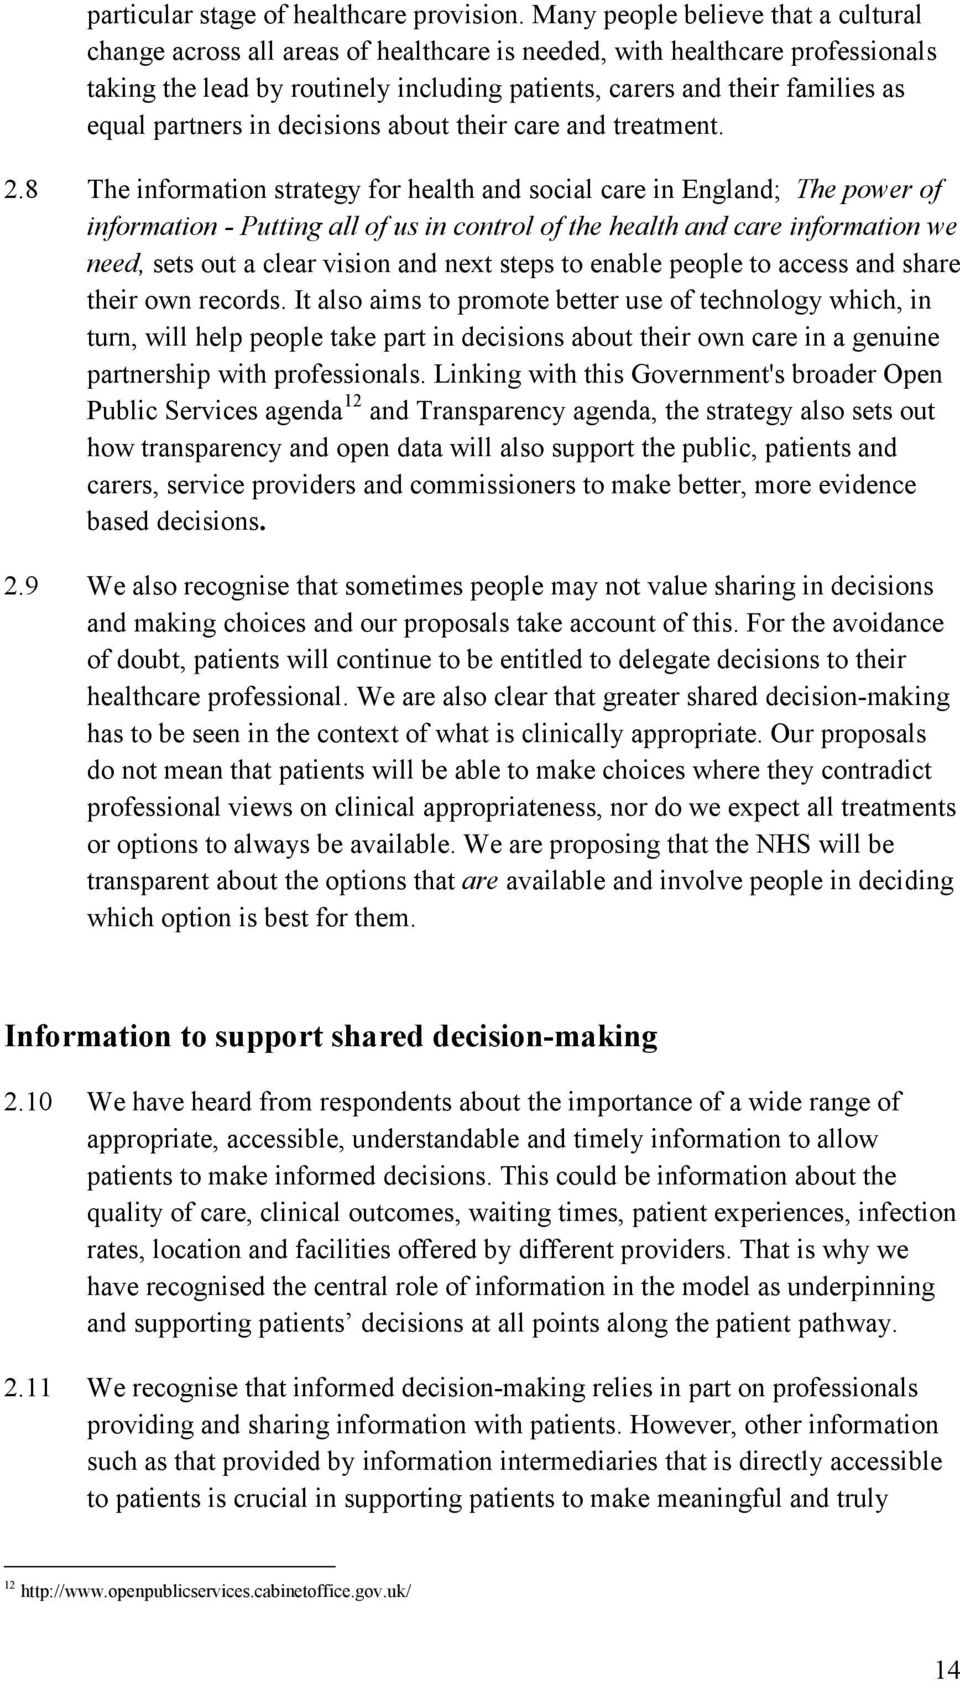 partners in decisions about their care and treatment. 2.